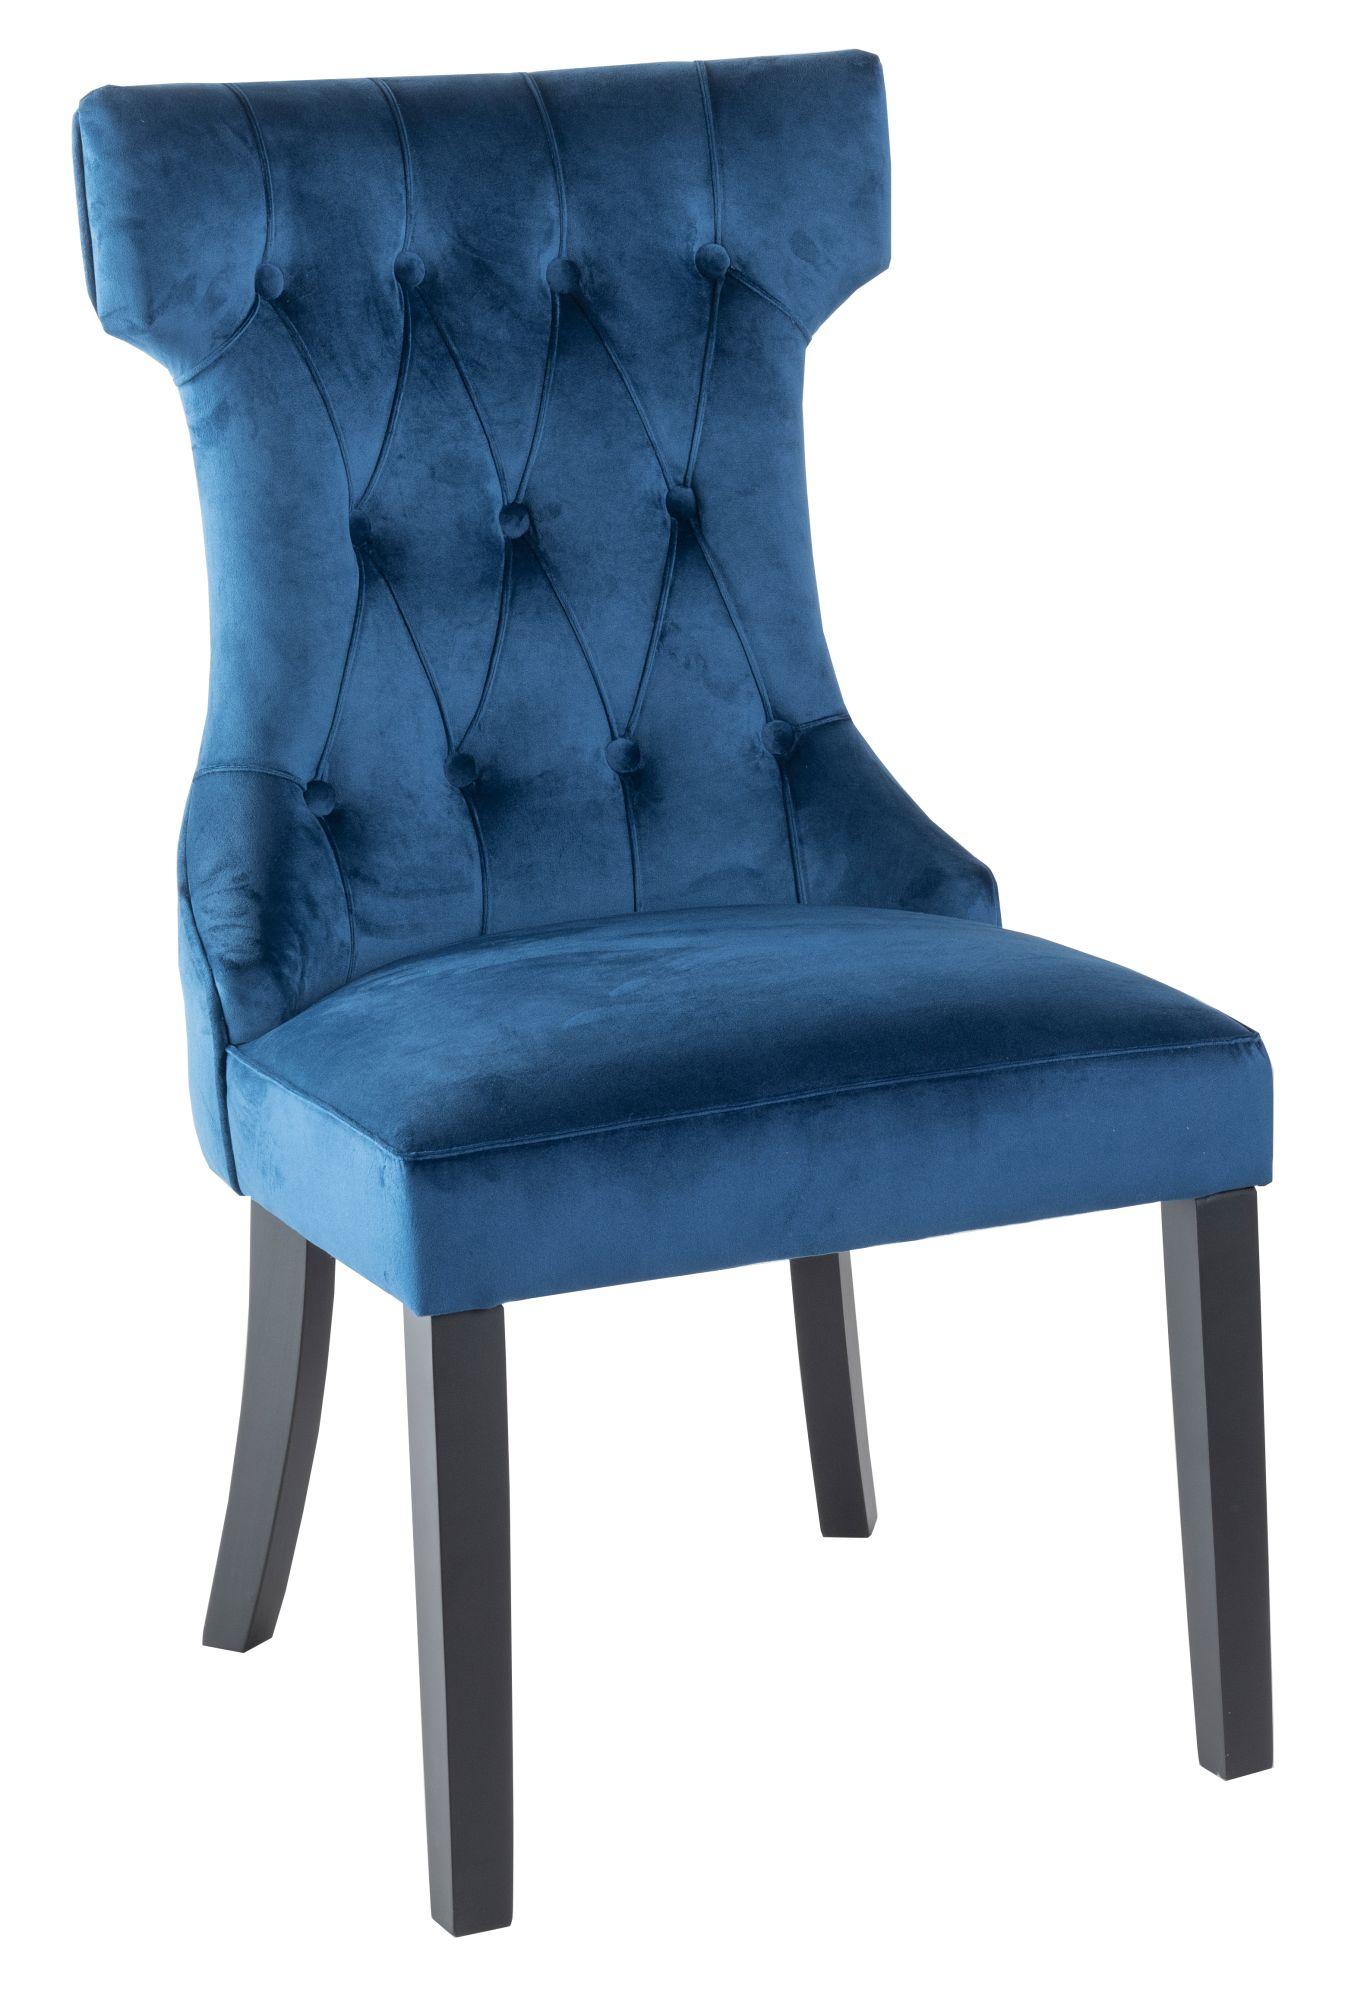 Courtney Blue Dining Chair, Tufted Velvet Fabric Upholstered with Black Wooden Legs